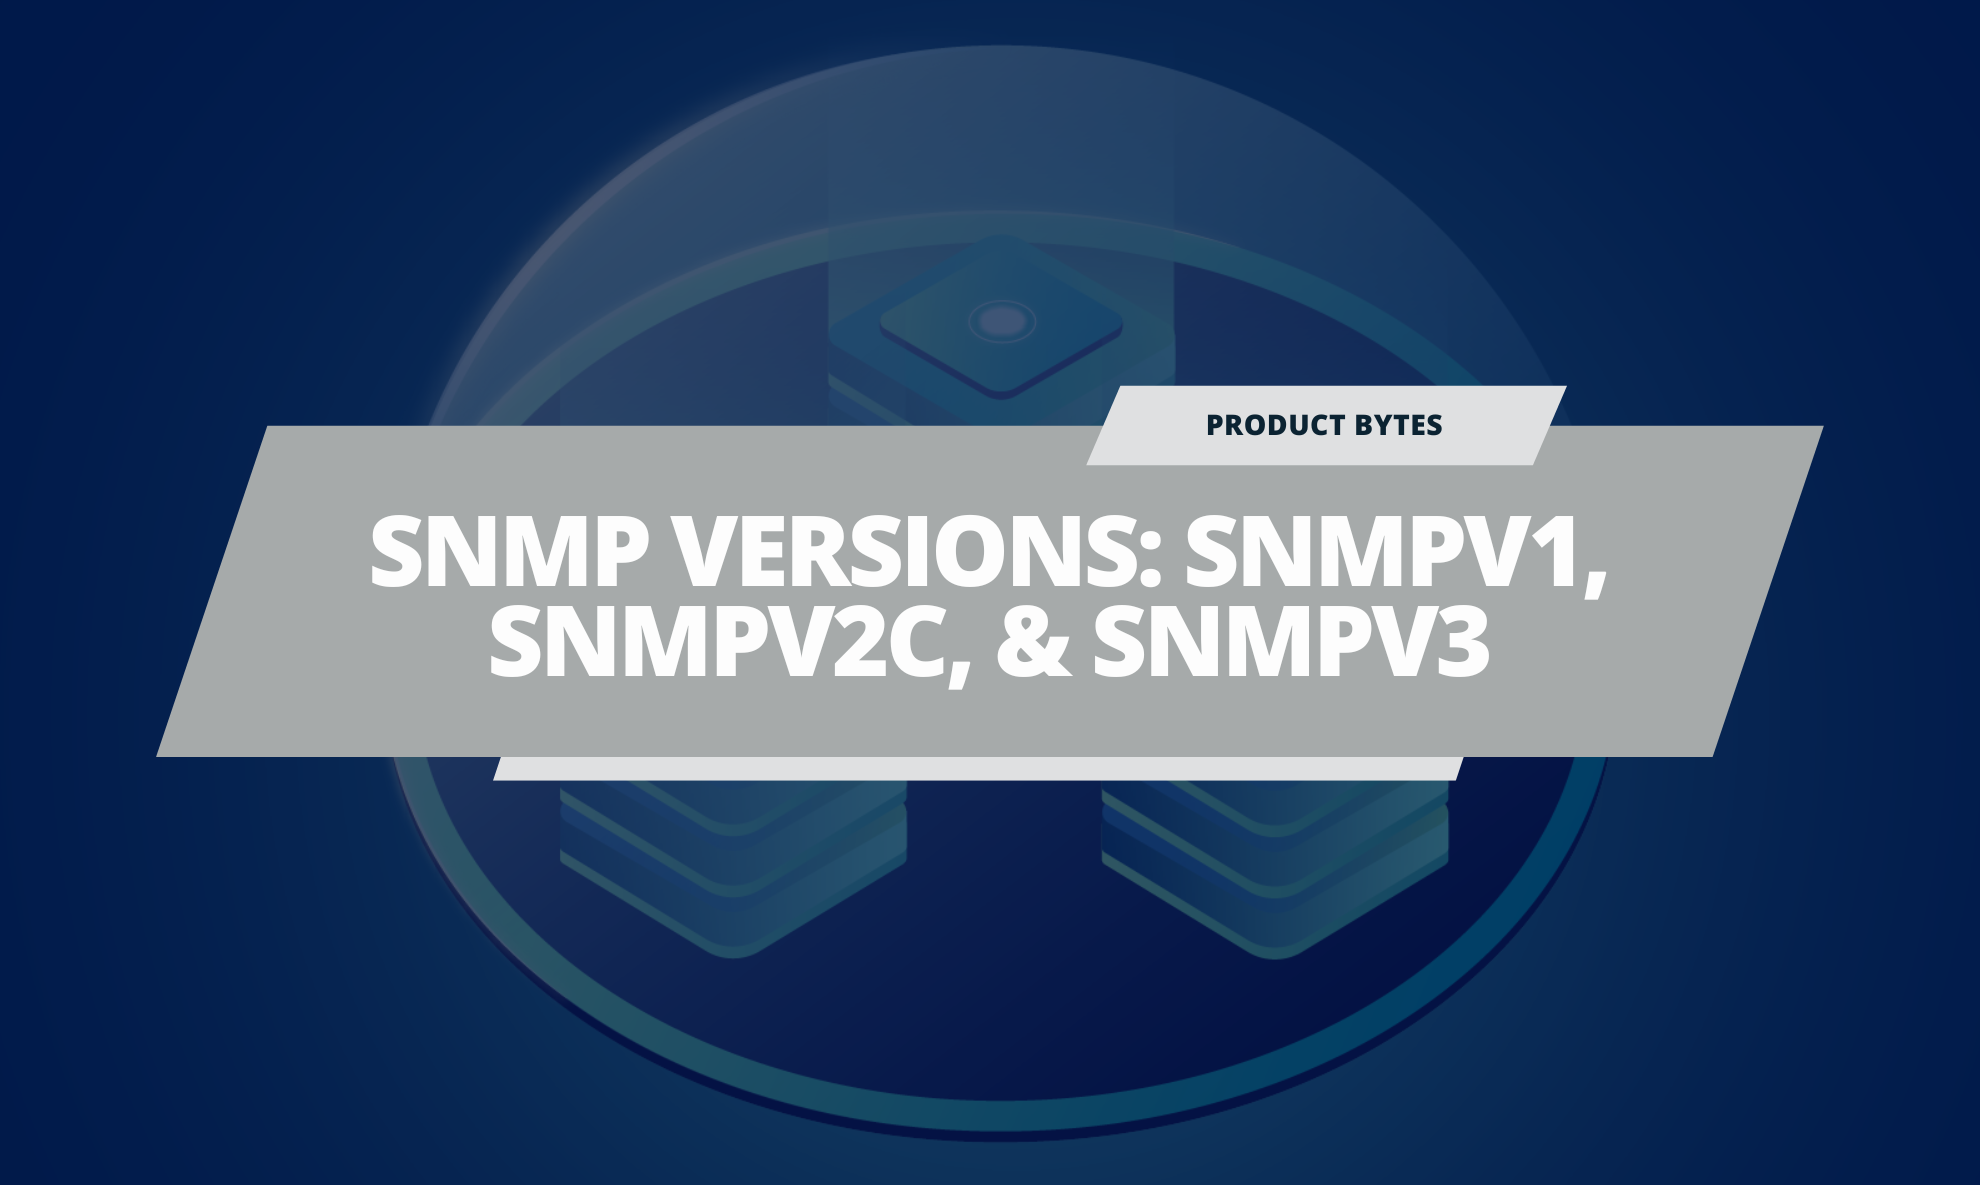 snmp versions